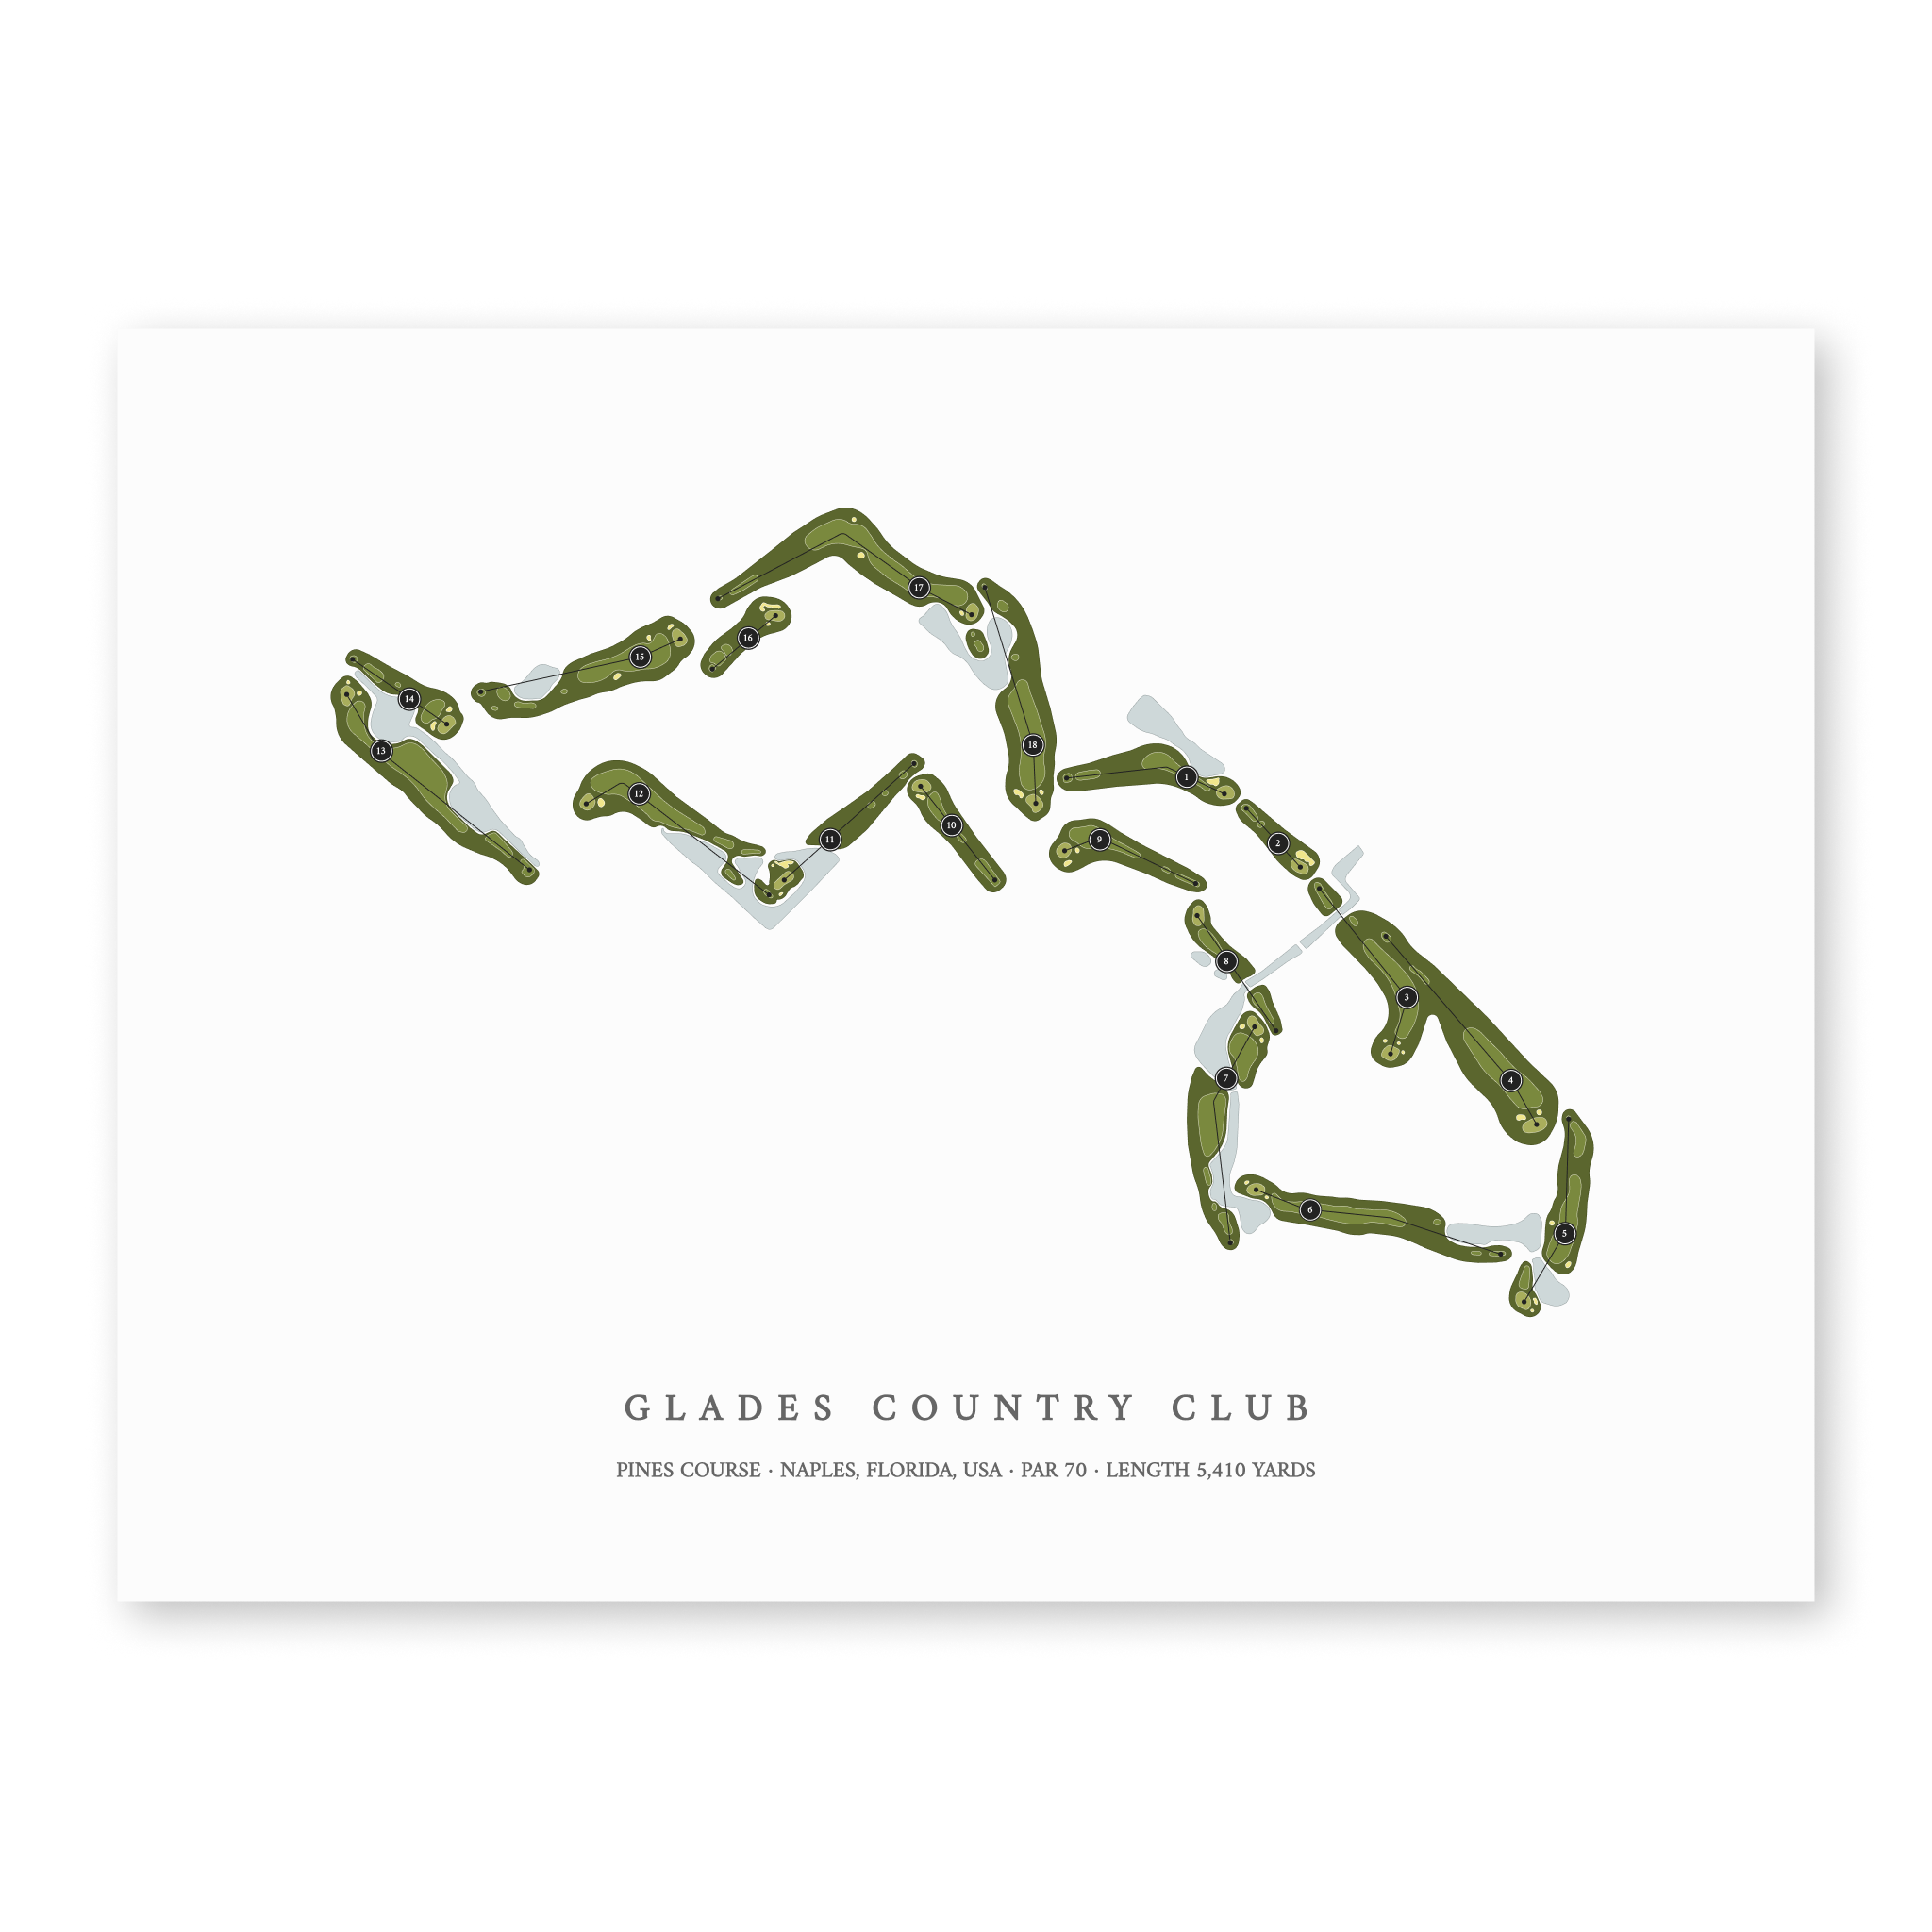 Glades Country Club - Pines Course | Golf Course Map | Unframed